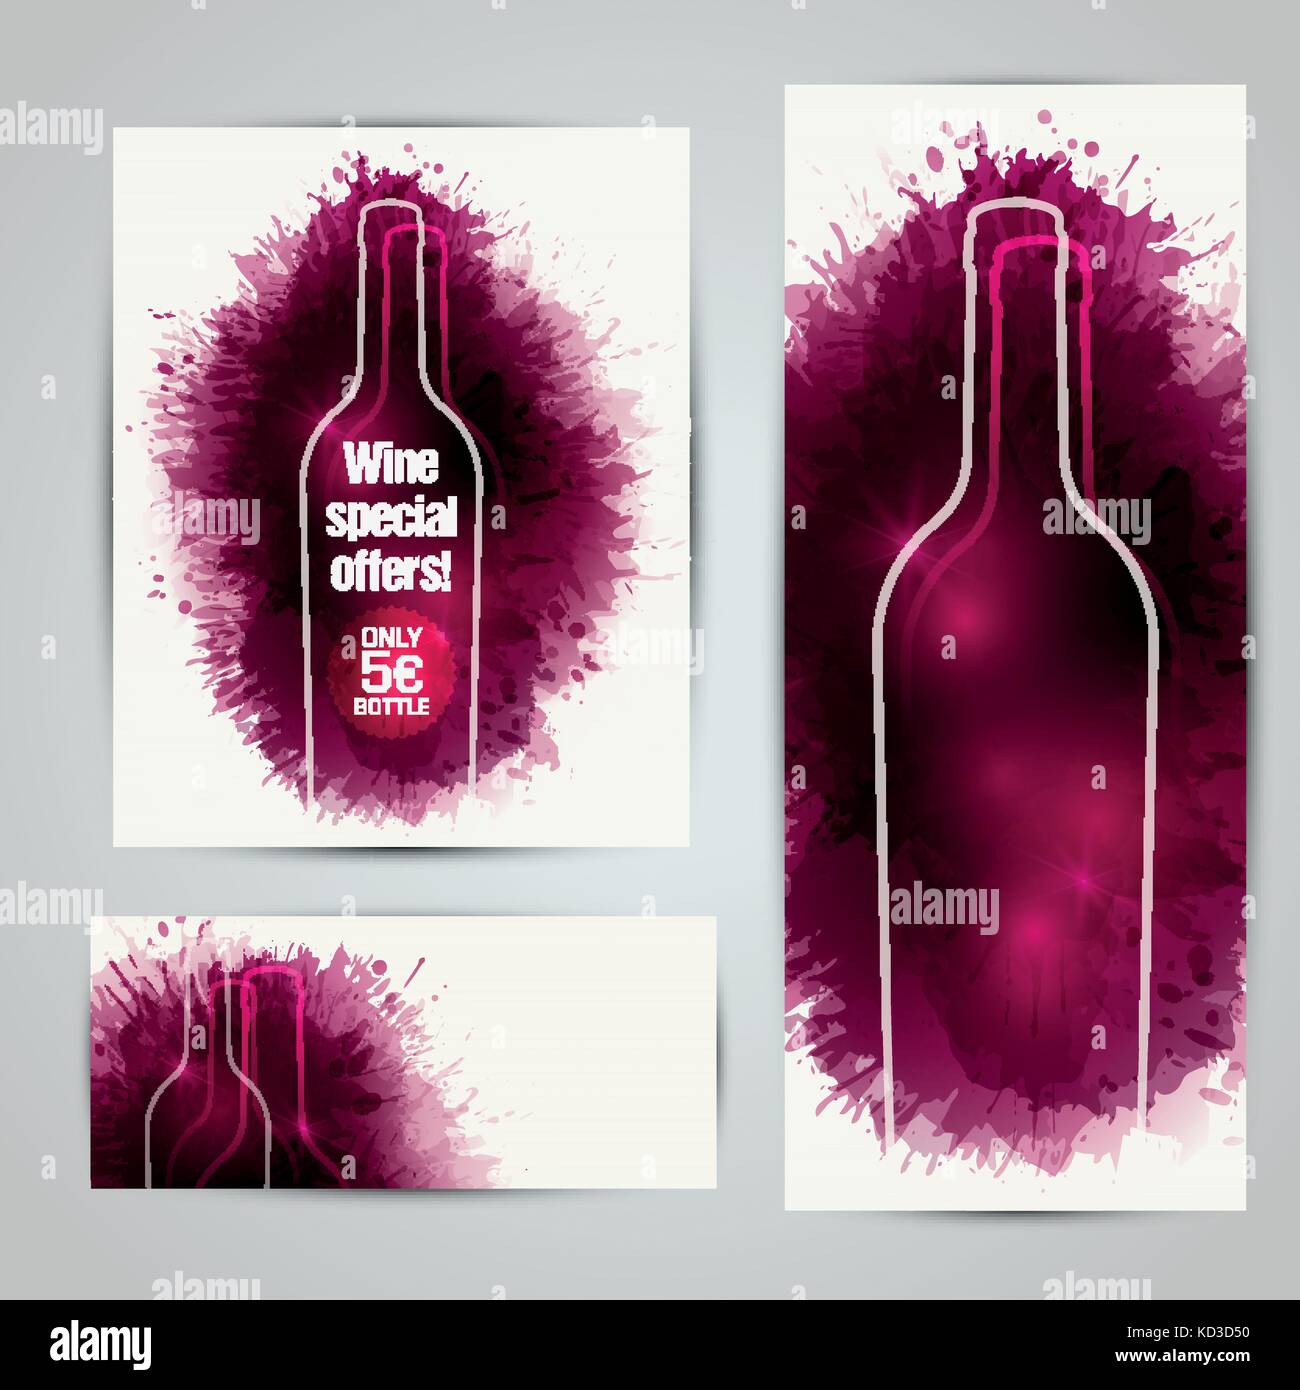 Banners or leaflets for wine promotions.Background with wine stains, expressive texture. Idea for your design. Vector Stock Vector